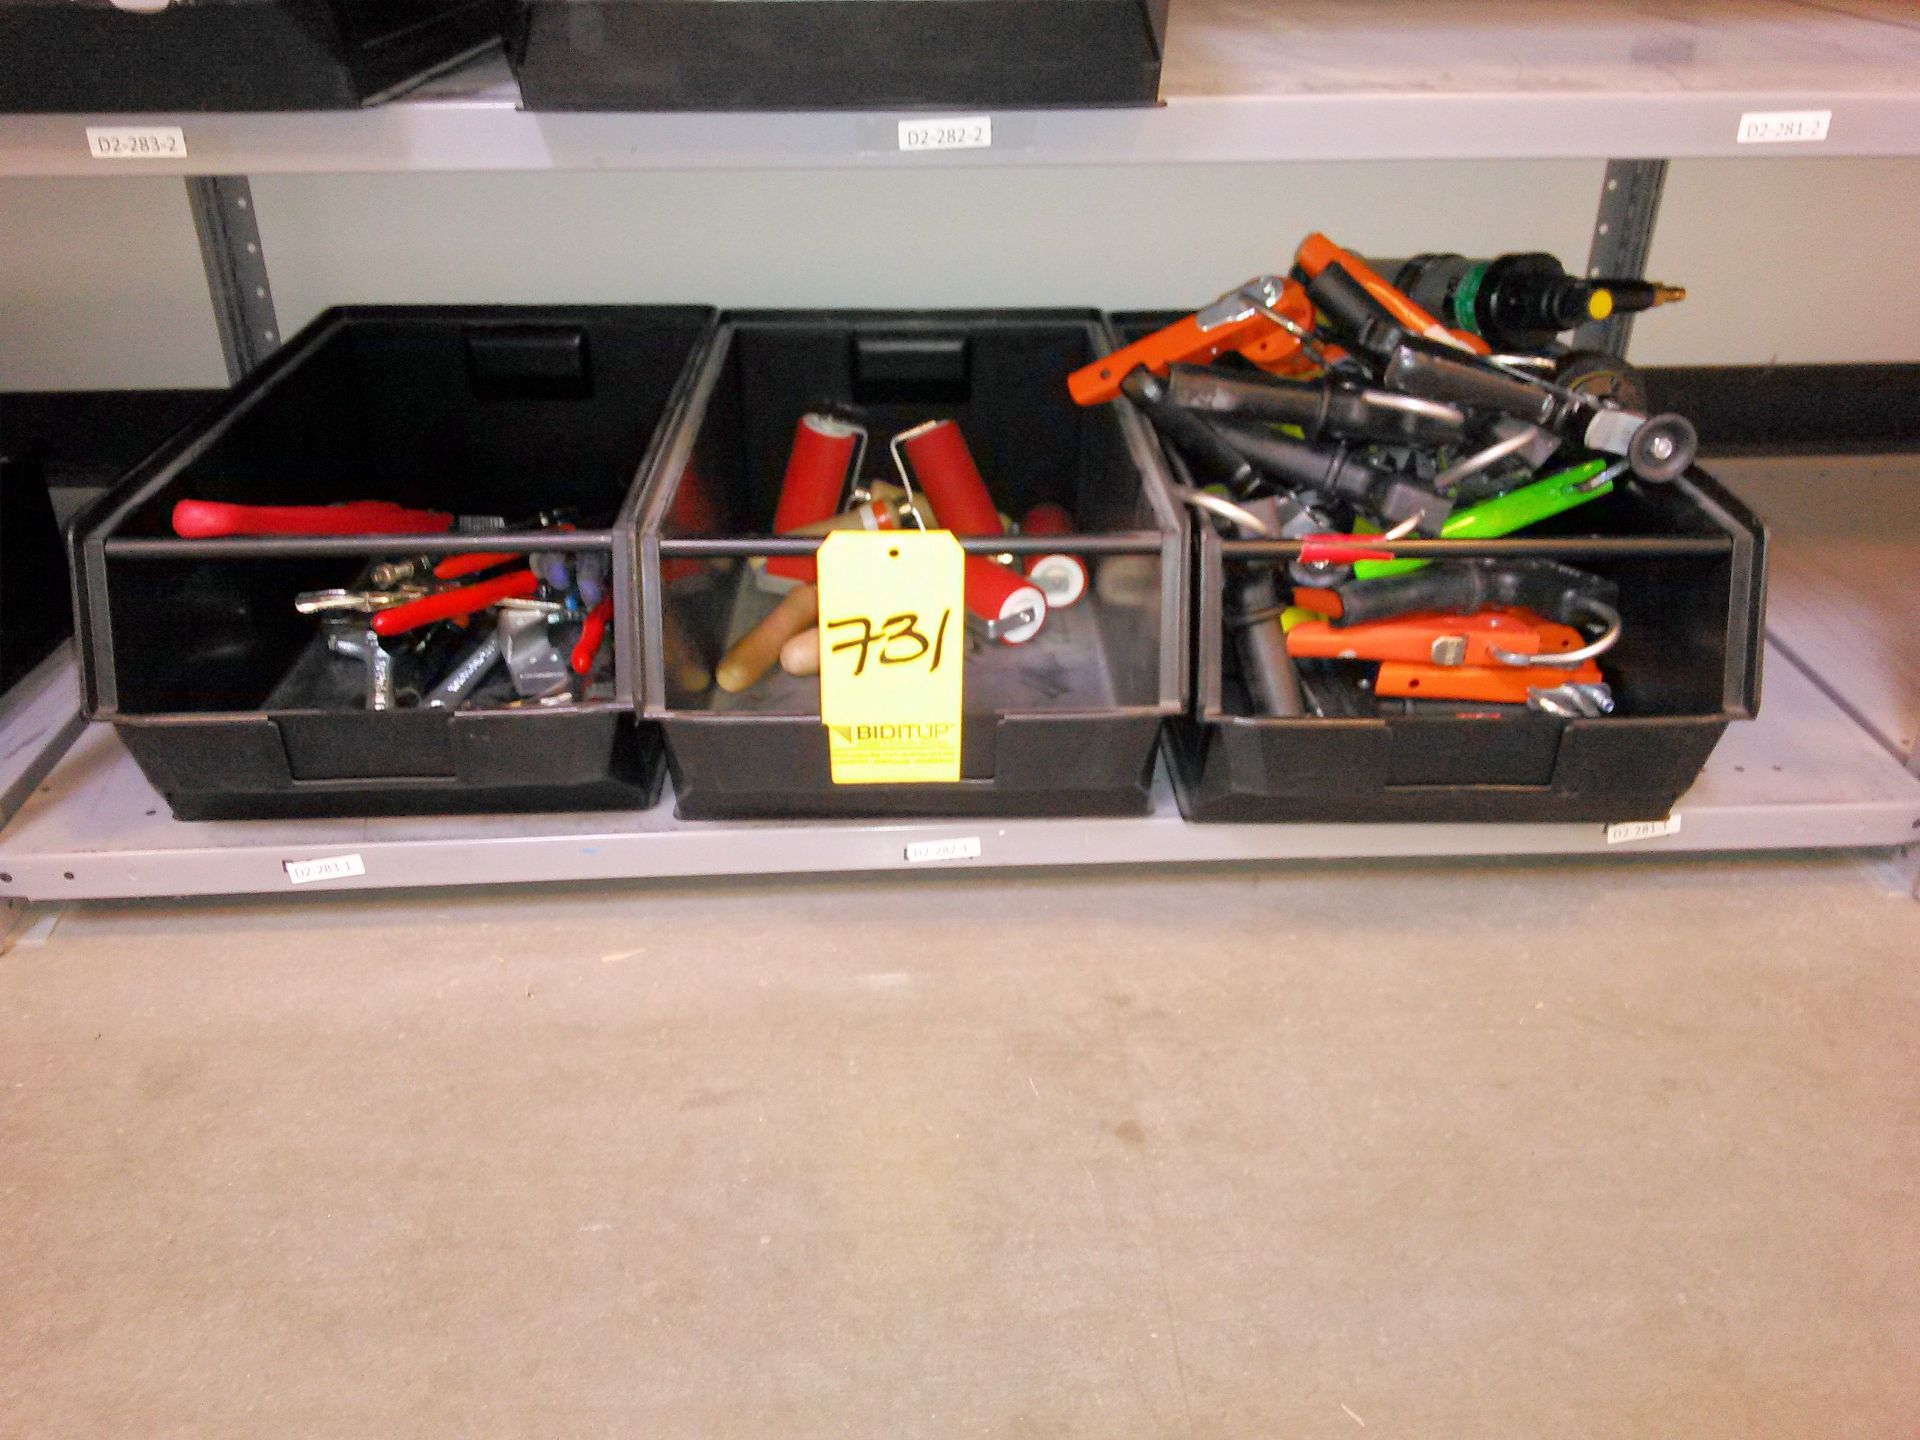 Lot-Adjustable Wrenches, Stencil Rollers and Caulk Guns in (3) Bins, (Bldg 2)